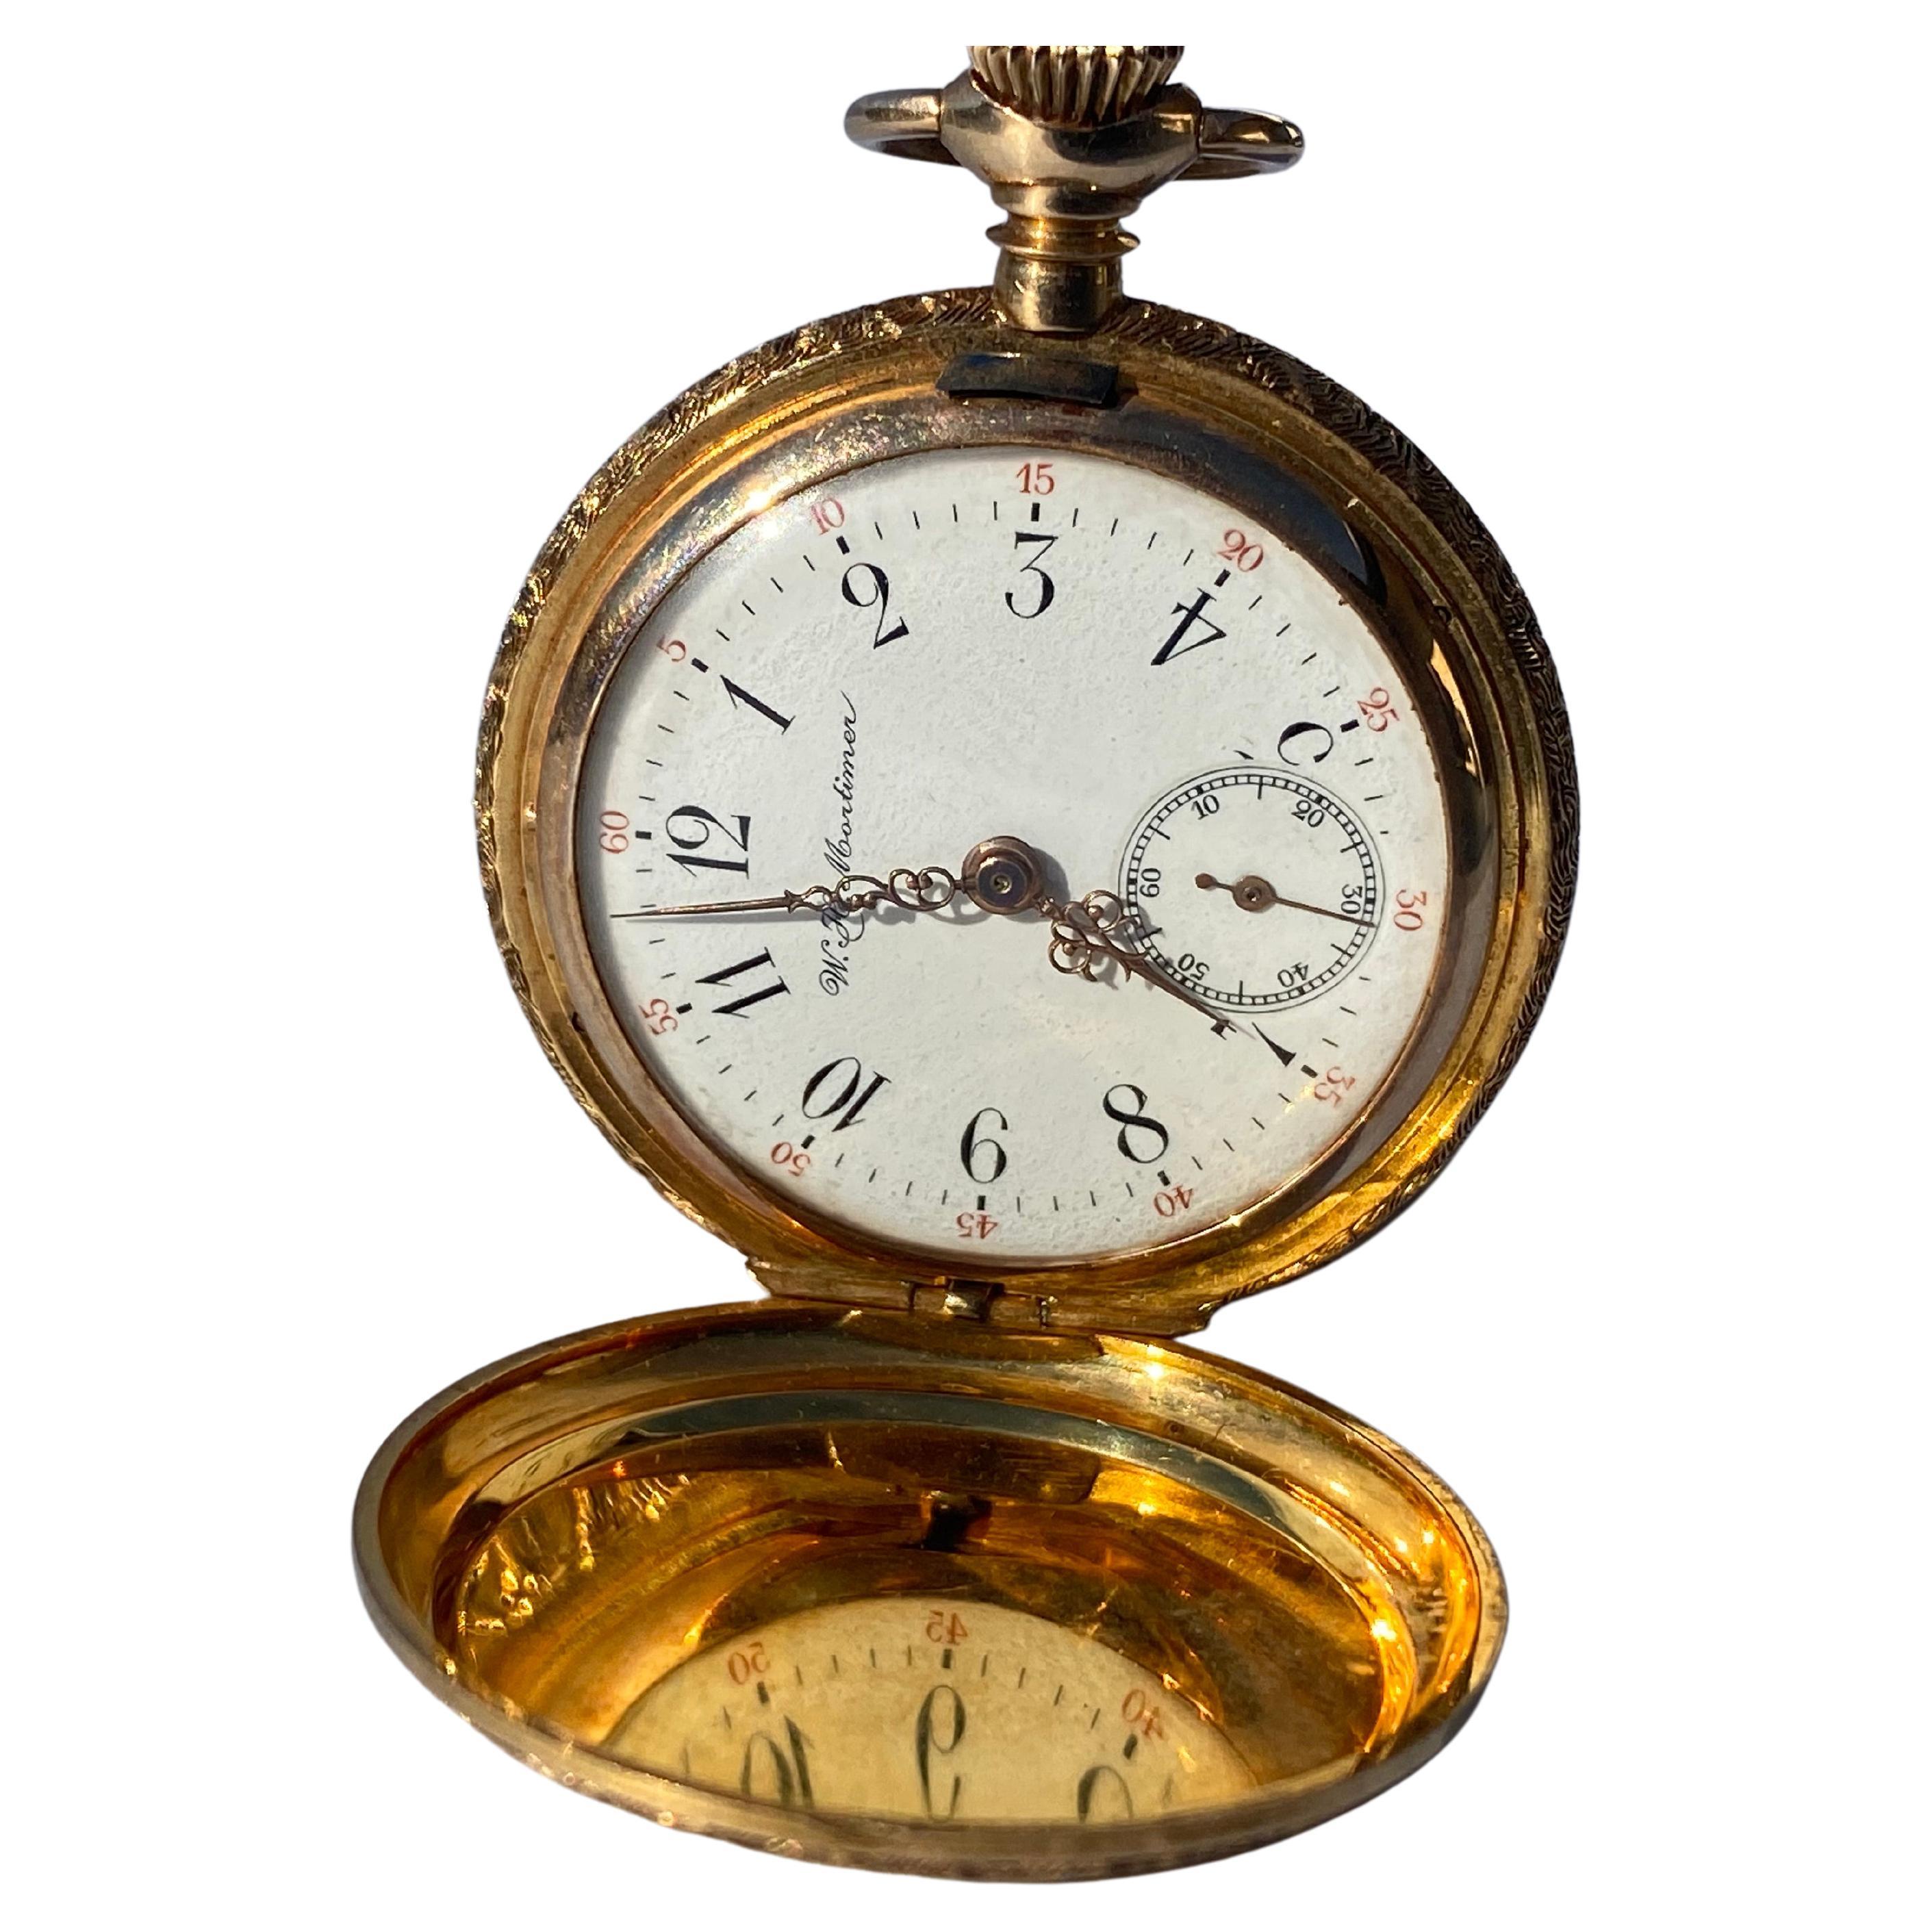 W.H. Mortimer Co. 33 mm in diameter
Inside Movement Case no. 1672137

14 karat pocket watch is Circa 1900's and is in working condition.
Small second-hand reader at 6:00
Porcelain white dial with black numbers. Red second-hand indicators at the